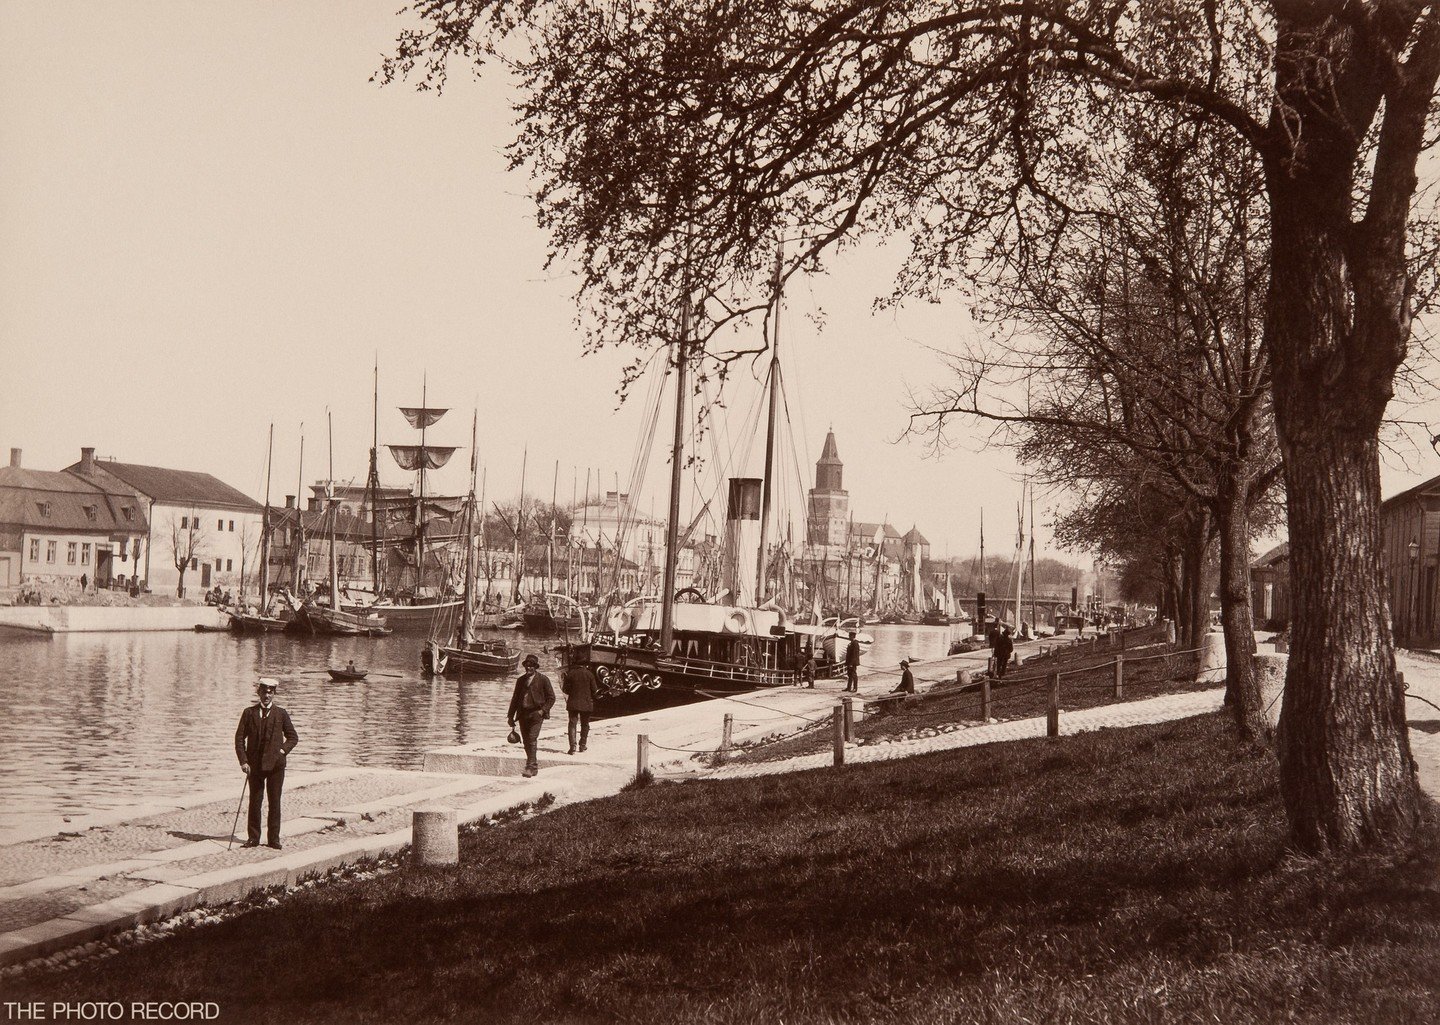 In the 1890s, the Turku waterfront along the Aura River featured bustling maritime activity, with warehouses, docks, and merchant houses lining the riverbanks. The Turku Cathedral, a prominent landmark, overlooked the scene. The area served as a hub 